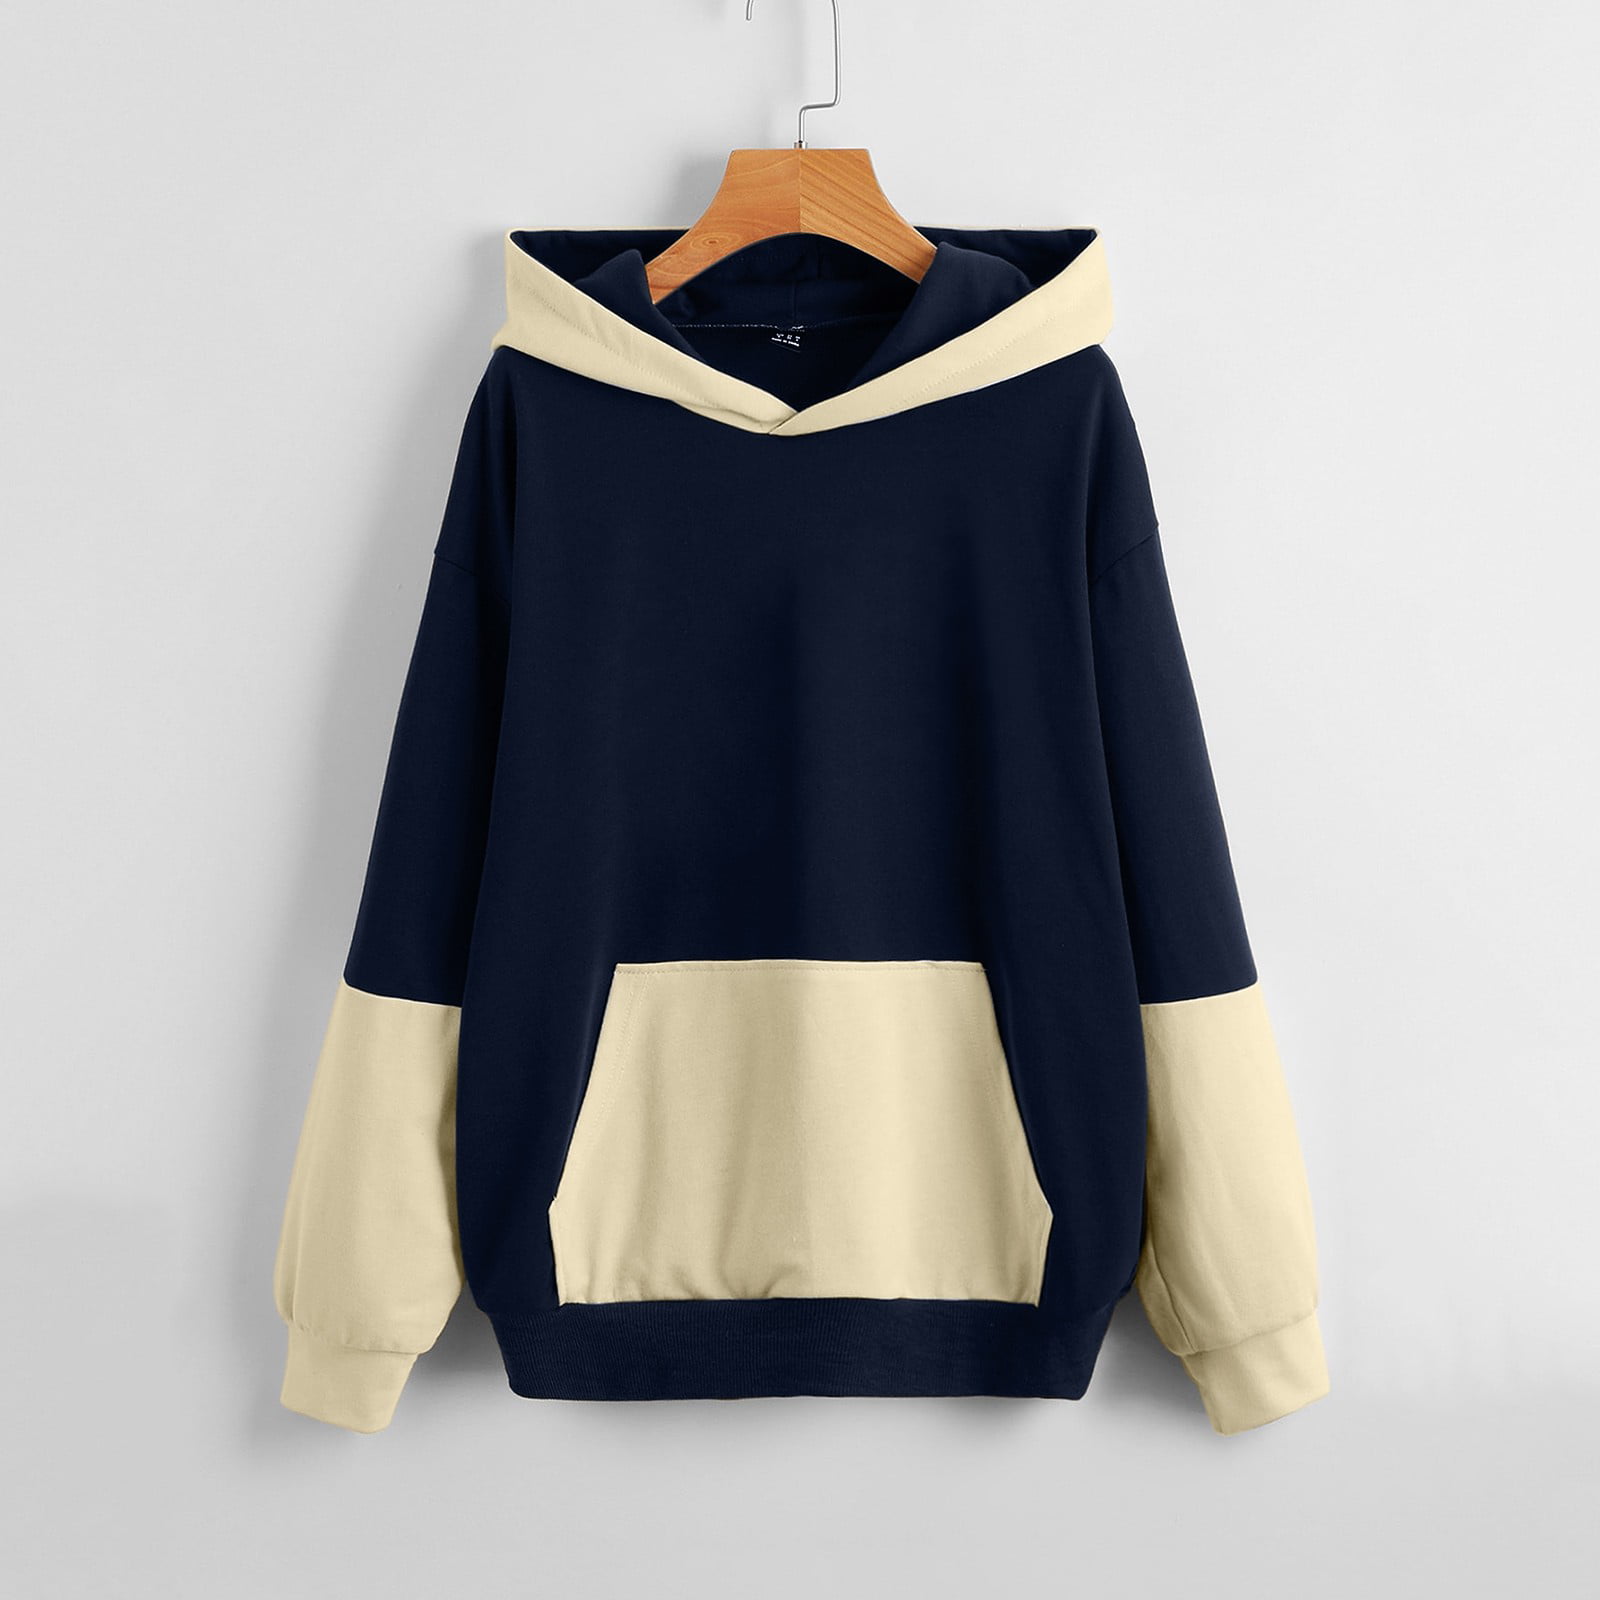 Bomden Womens Fashion Casual Hoodie Sweater Top Long-Sleeved Wool Pullover Colorblock Pullover Sweater Sweatshirt